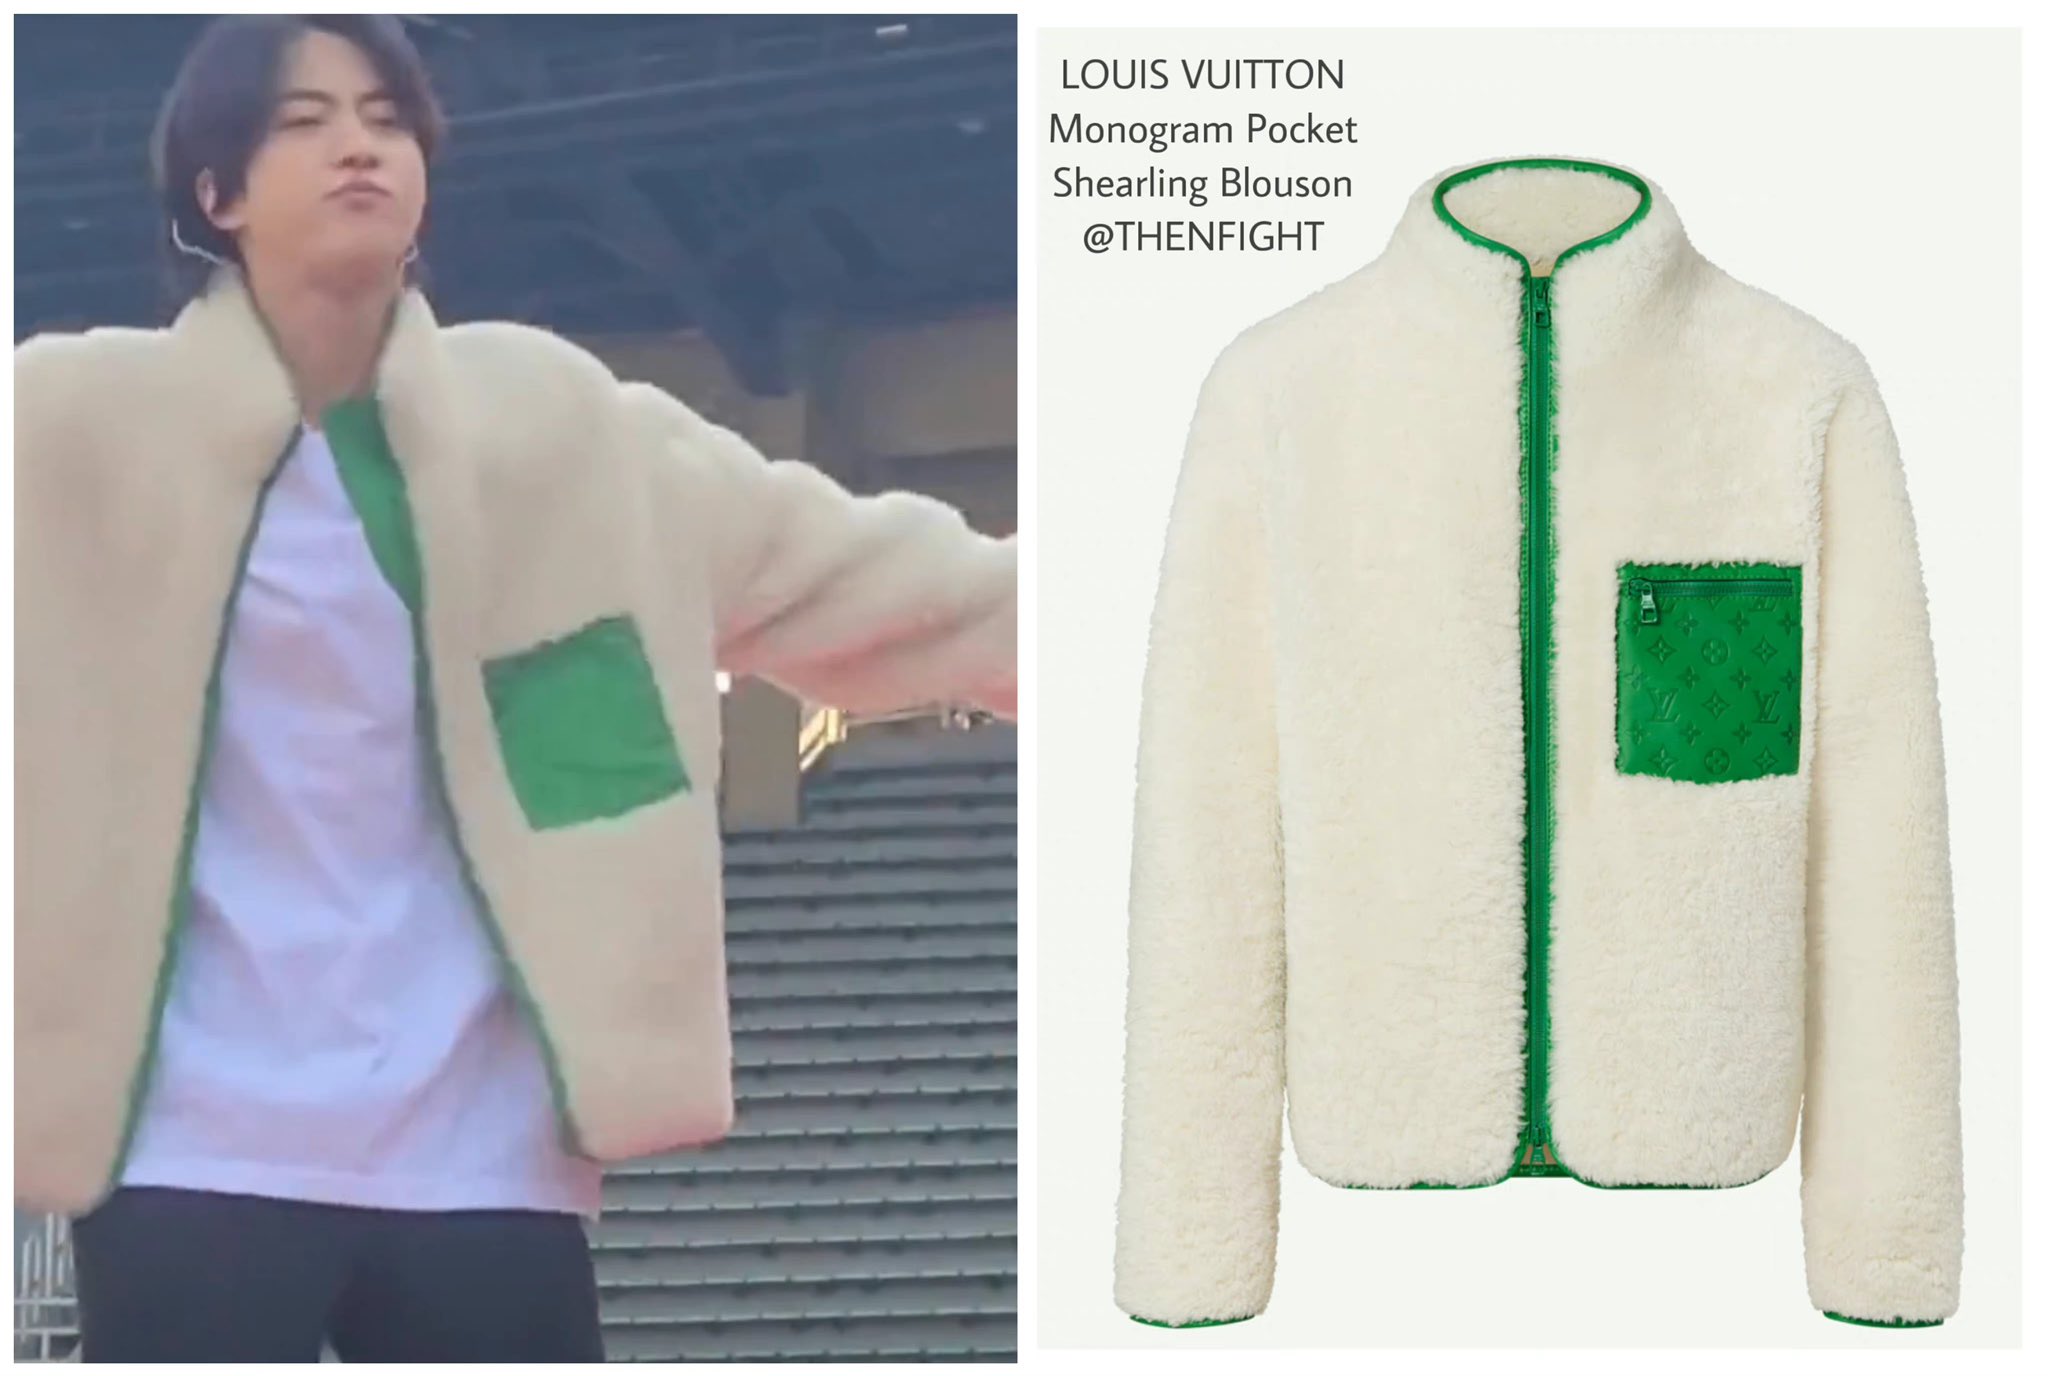 THENFIGHT on X: 220310 BTS PERMISSION TO DANCE ON STAGE IN SEOUL  SOUNDCHECK #BTS #방탄소년단 LOUIS VUITTON OFF-WHITE CARHARTT GUCCI TOM FORD  SYSTEM  / X